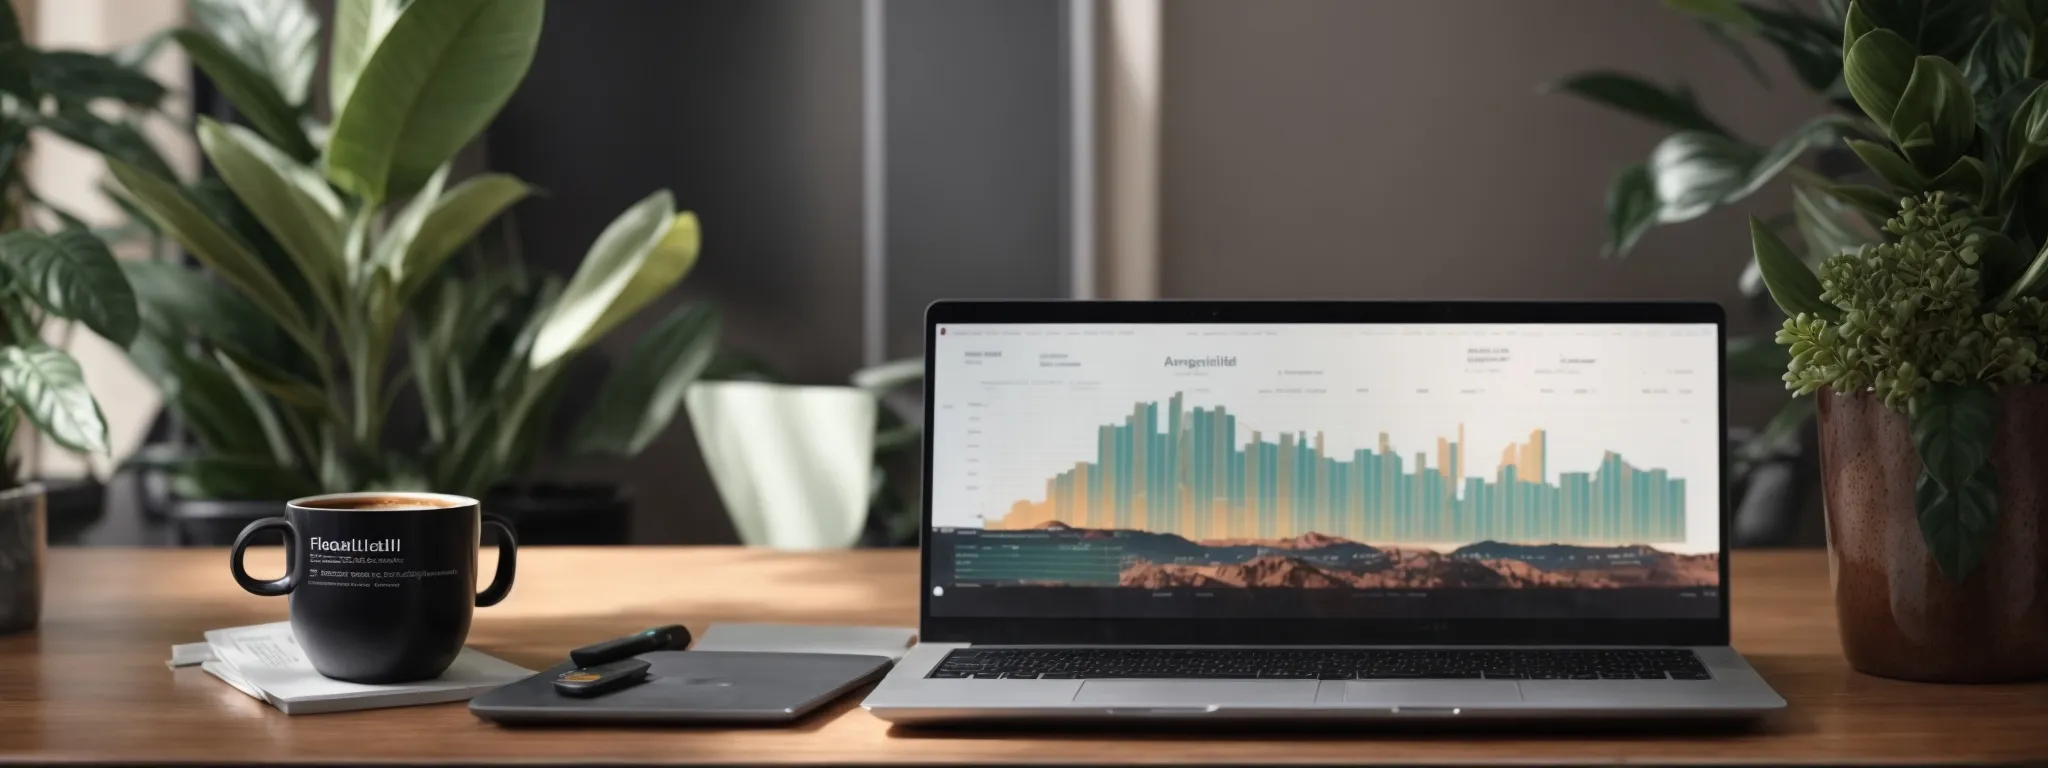 a sleek laptop displaying vibrant analytics graphs on a polished desk flanked by a potted succulent and a steaming coffee cup.